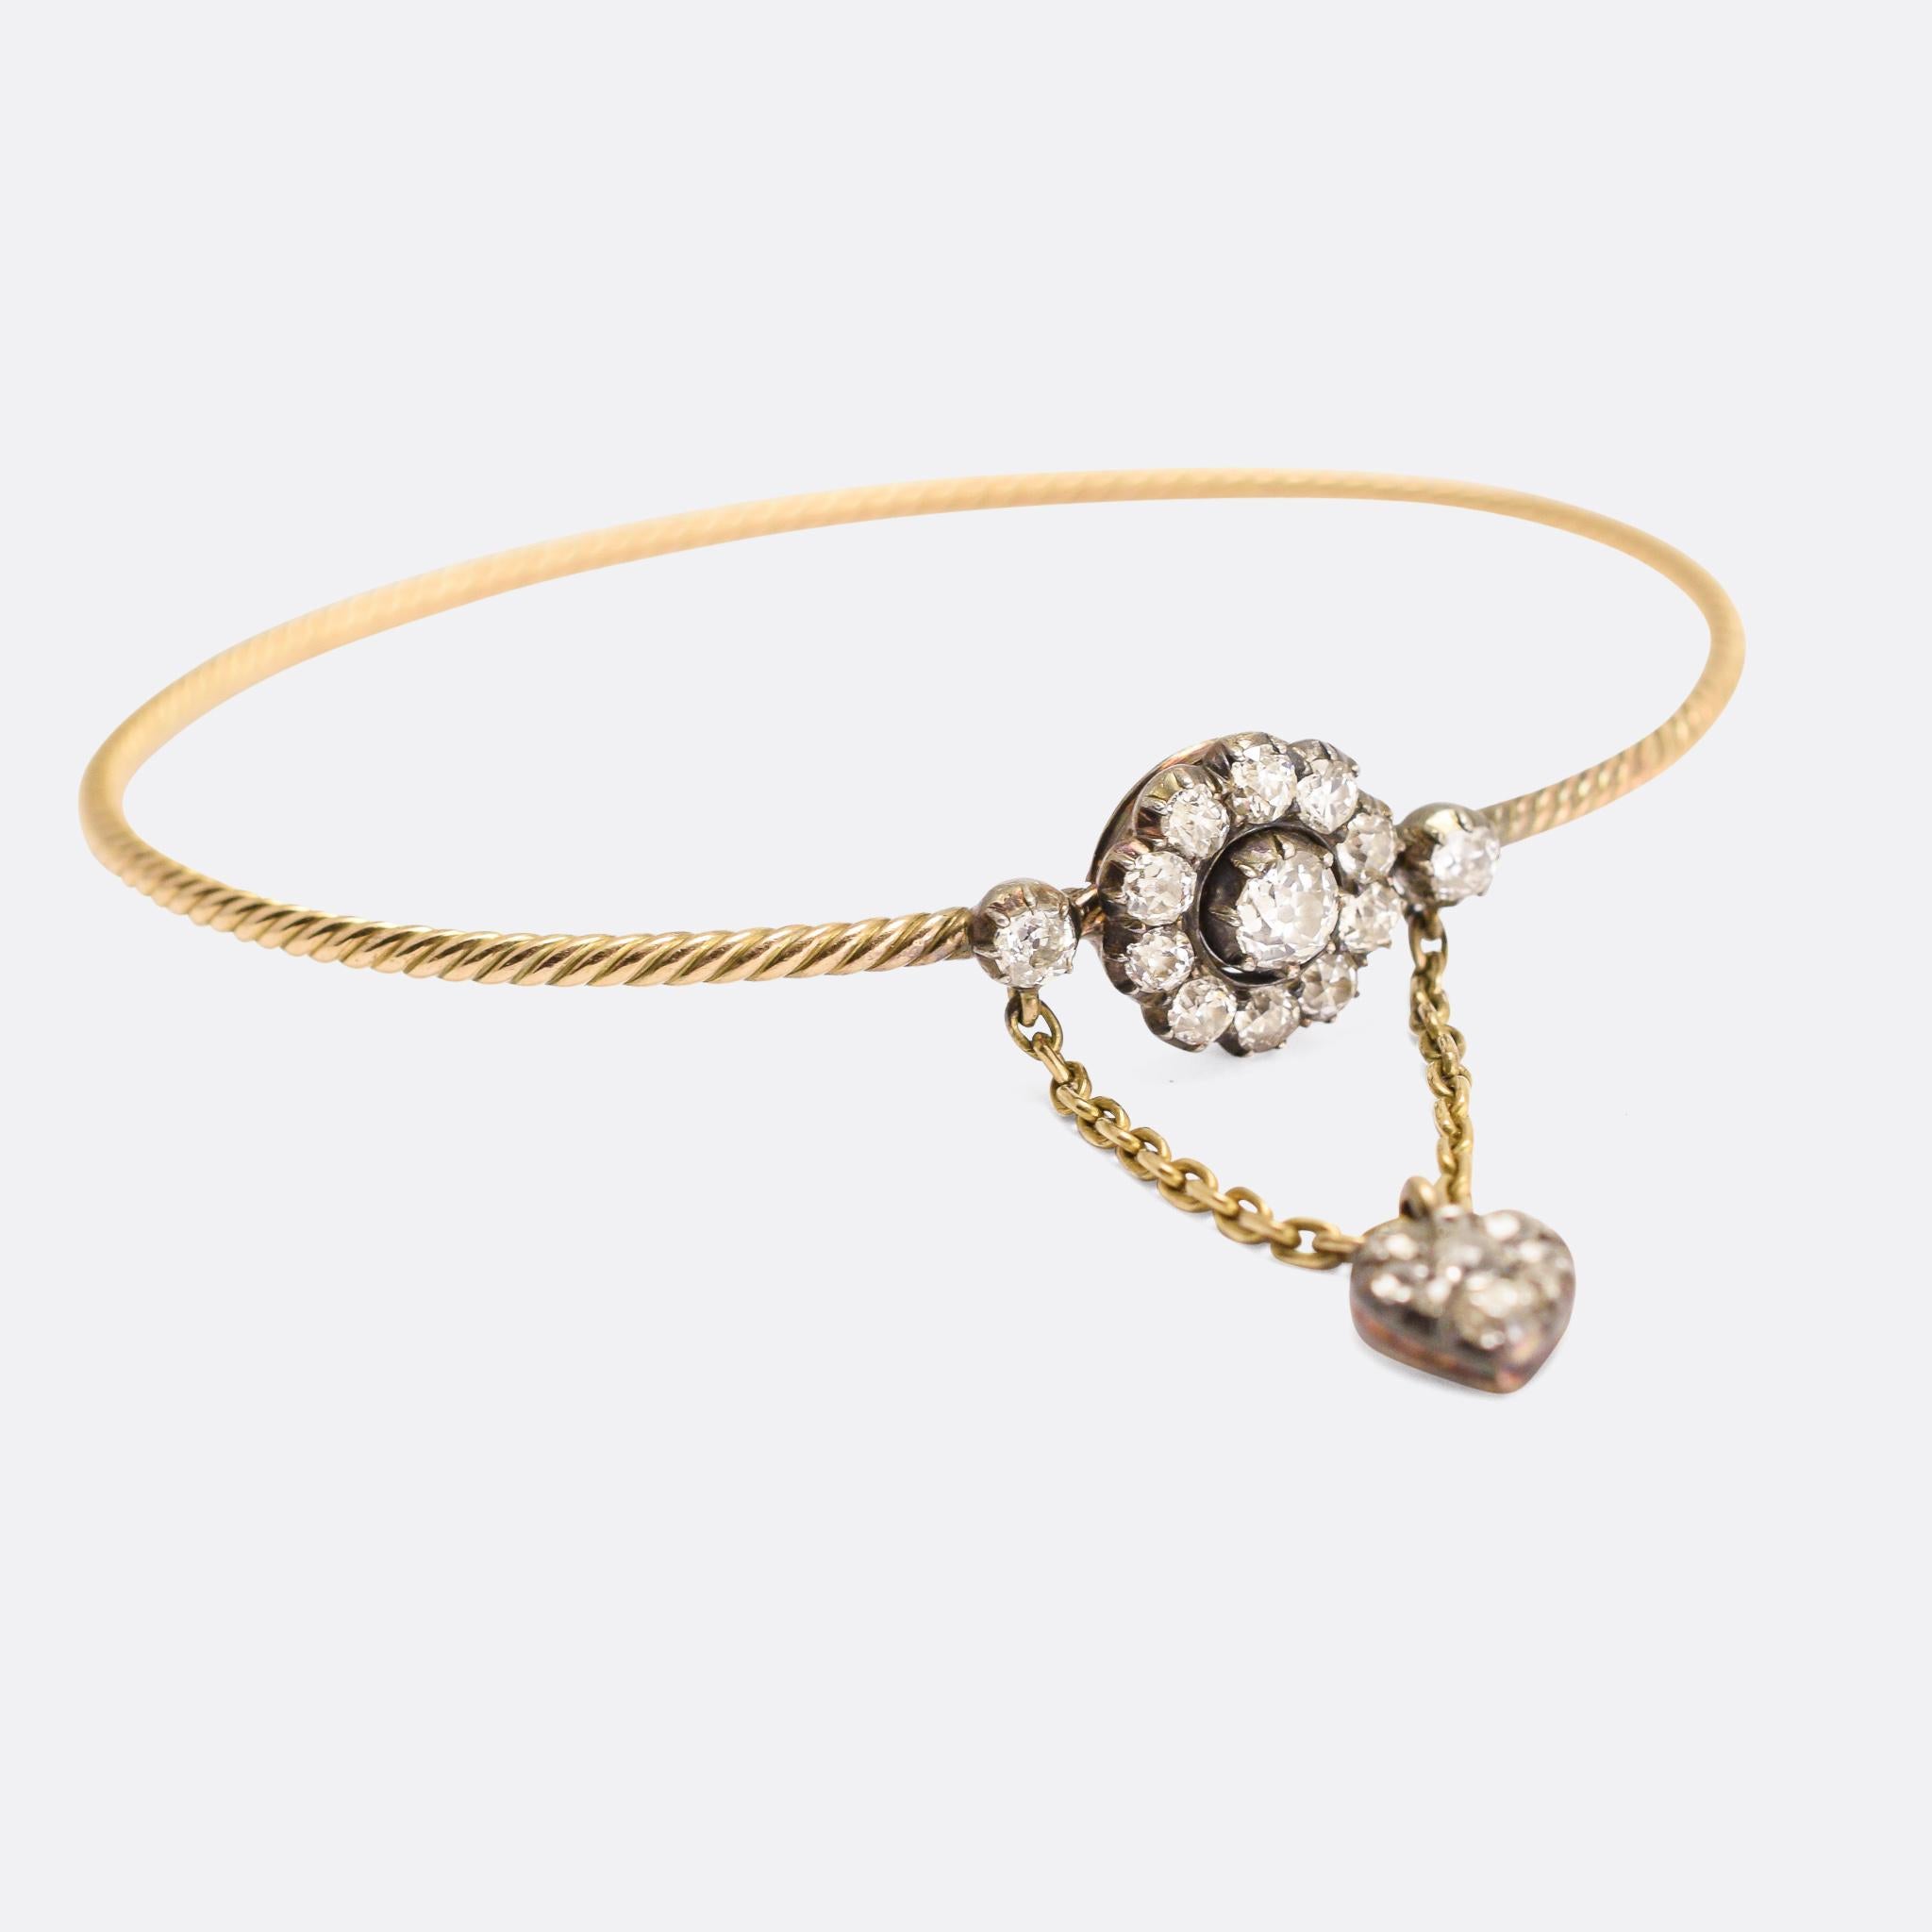 A stunning antique bangle dating from the mid-19th Century, circa 1840. The head is modelled as a flower, set with bright old mine cut diamonds, with a diamond-set heart drop dangling freely beneath. The gold band has been crafted with a twist motif